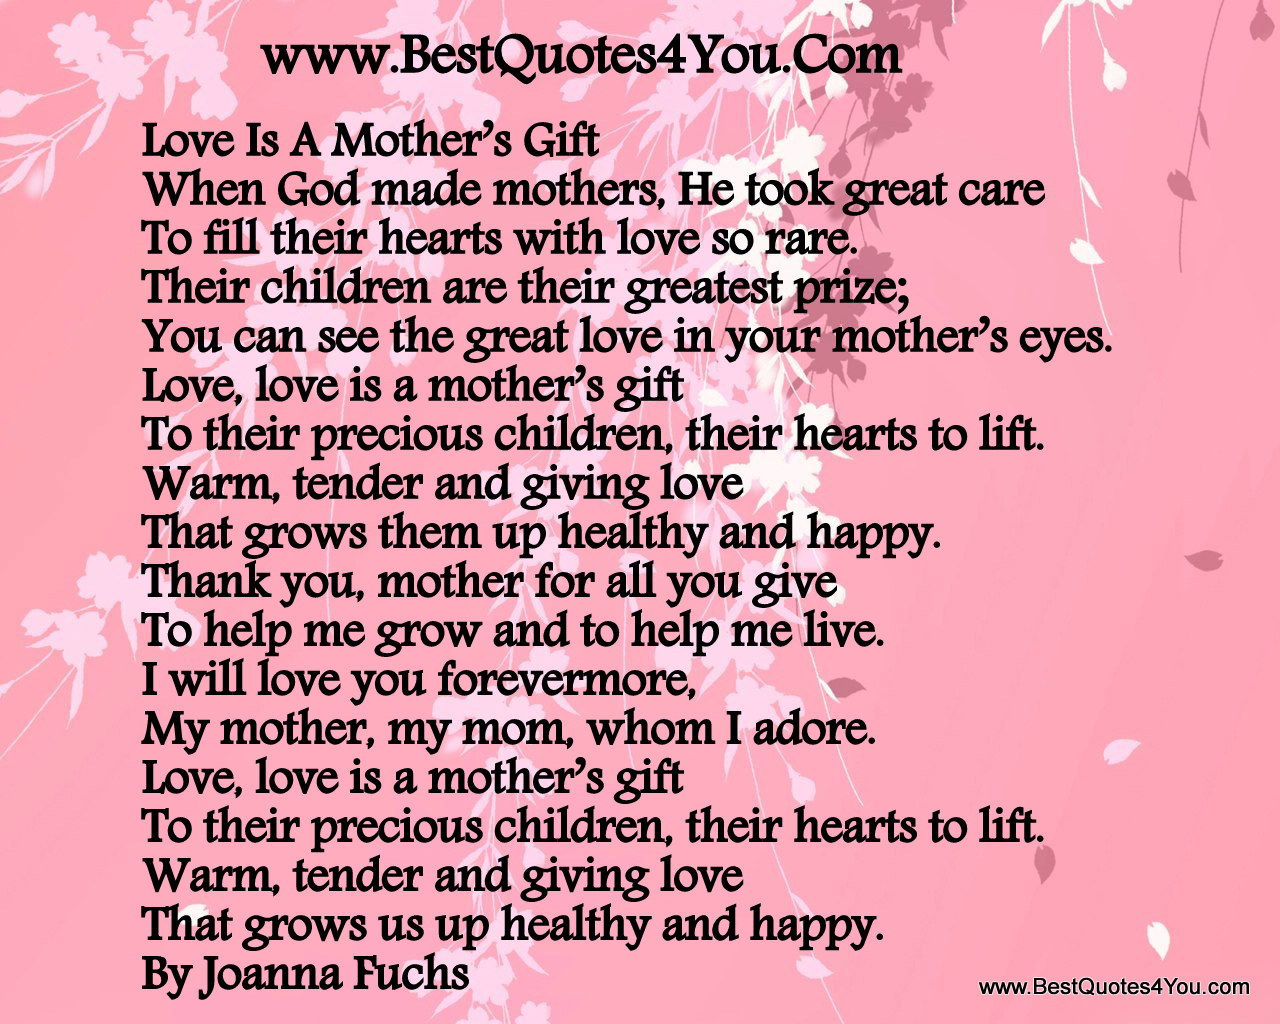 Mothers And Their Sons Quotes. QuotesGram